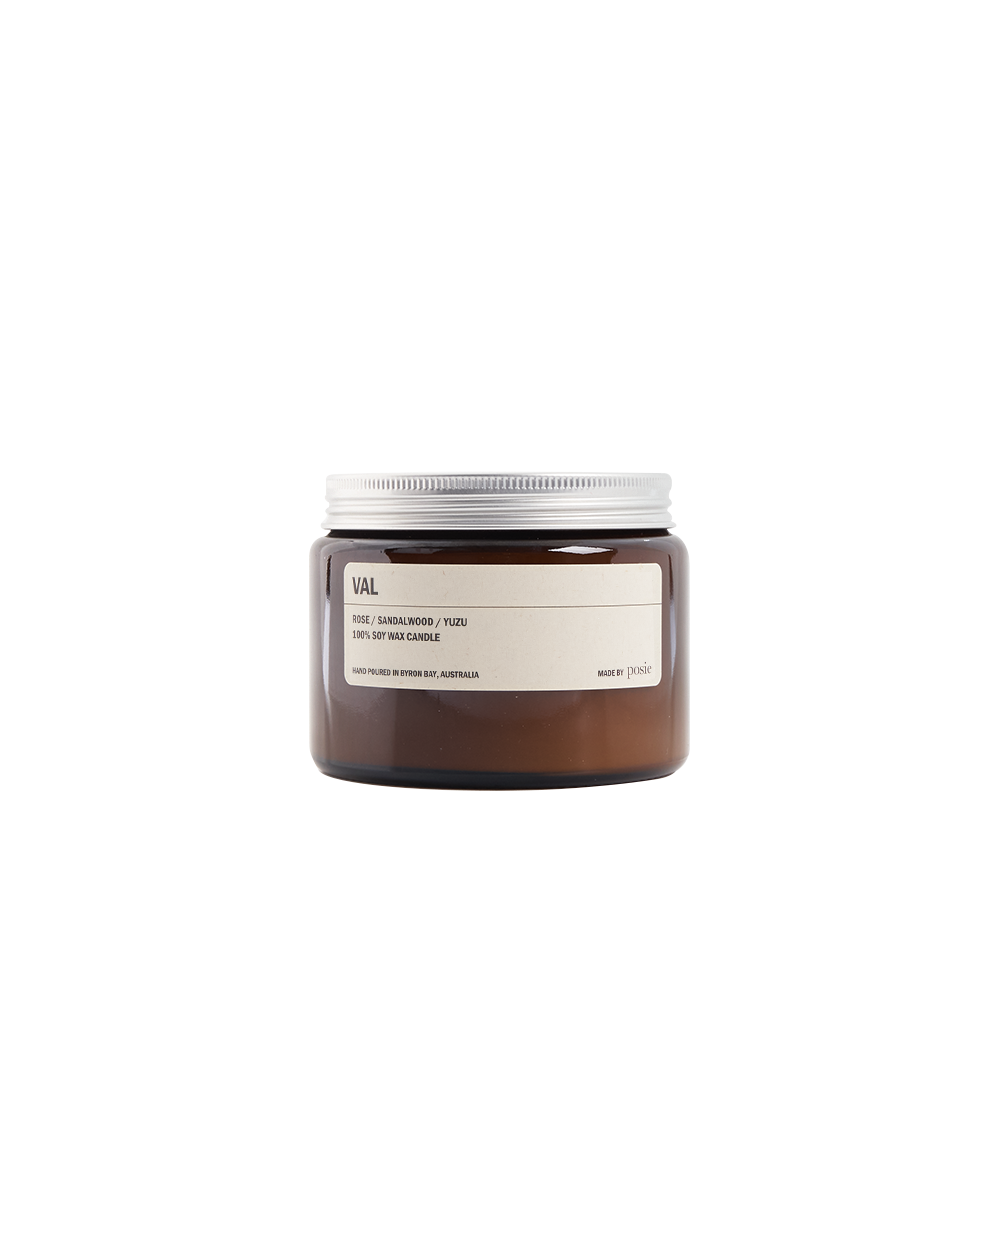 500g Amber Jay Soy Candle - VAL